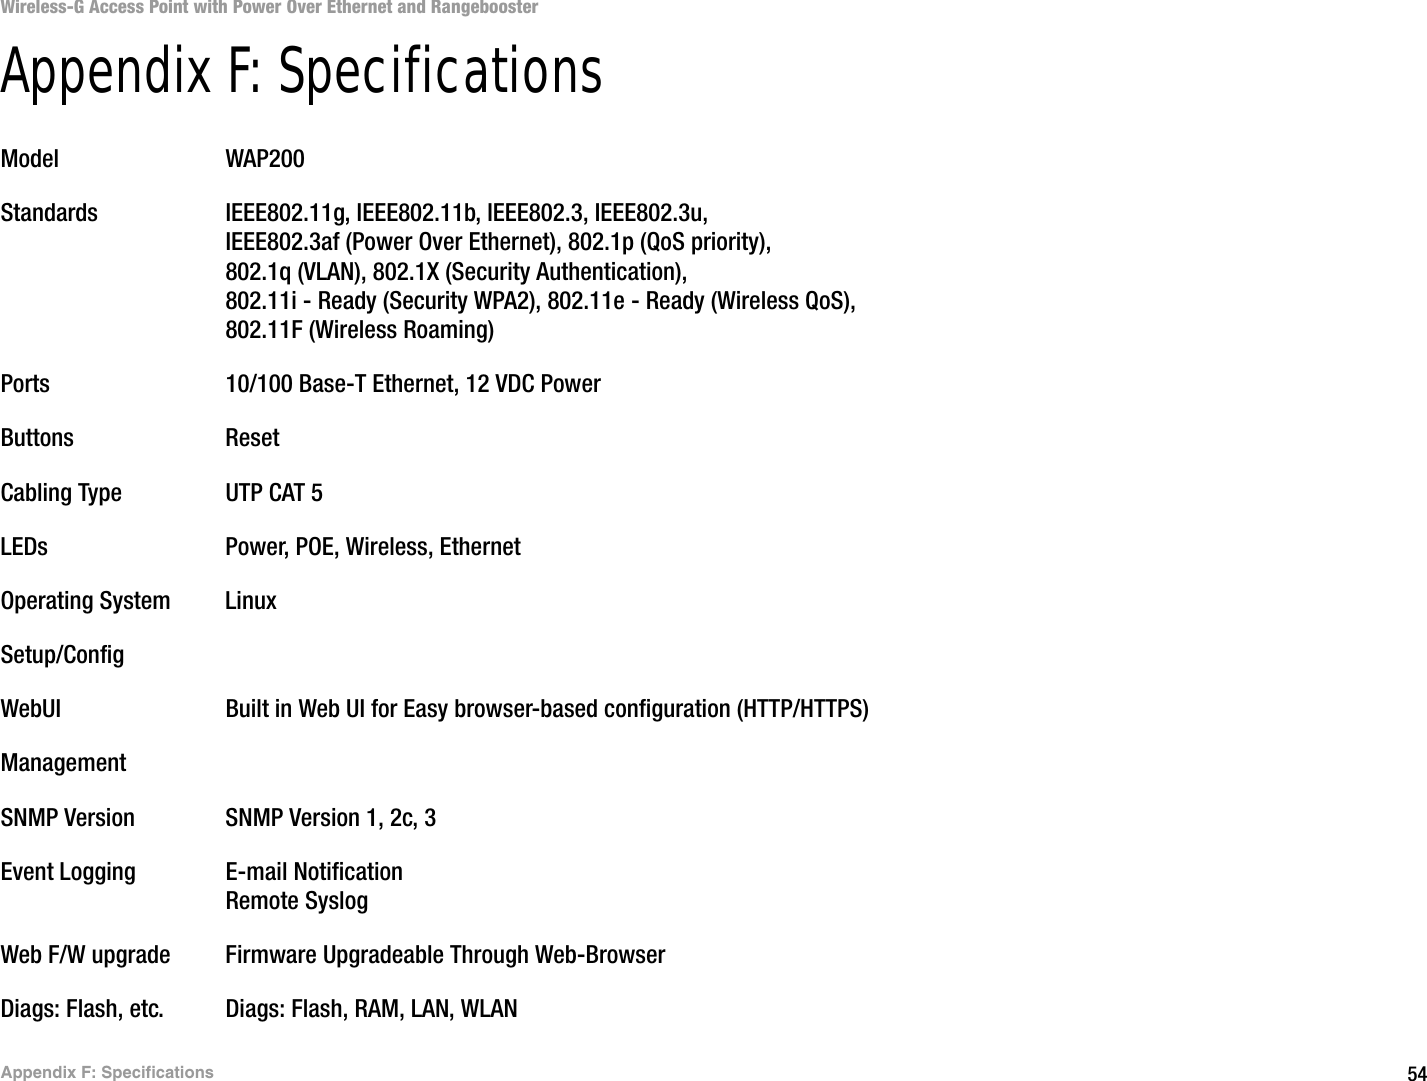 54Appendix F: SpecificationsWireless-G Access Point with Power Over Ethernet and RangeboosterAppendix F: SpecificationsModel WAP200Standards IEEE802.11g, IEEE802.11b, IEEE802.3, IEEE802.3u, IEEE802.3af (Power Over Ethernet), 802.1p (QoS priority), 802.1q (VLAN), 802.1X (Security Authentication), 802.11i - Ready (Security WPA2), 802.11e - Ready (Wireless QoS), 802.11F (Wireless Roaming)Ports 10/100 Base-T Ethernet, 12 VDC PowerButtons ResetCabling Type UTP CAT 5 LEDs Power, POE, Wireless, EthernetOperating System LinuxSetup/ConfigWebUI Built in Web UI for Easy browser-based configuration (HTTP/HTTPS)ManagementSNMP Version SNMP Version 1, 2c, 3Event Logging E-mail NotificationRemote SyslogWeb F/W upgrade Firmware Upgradeable Through Web-BrowserDiags: Flash, etc. Diags: Flash, RAM, LAN, WLAN